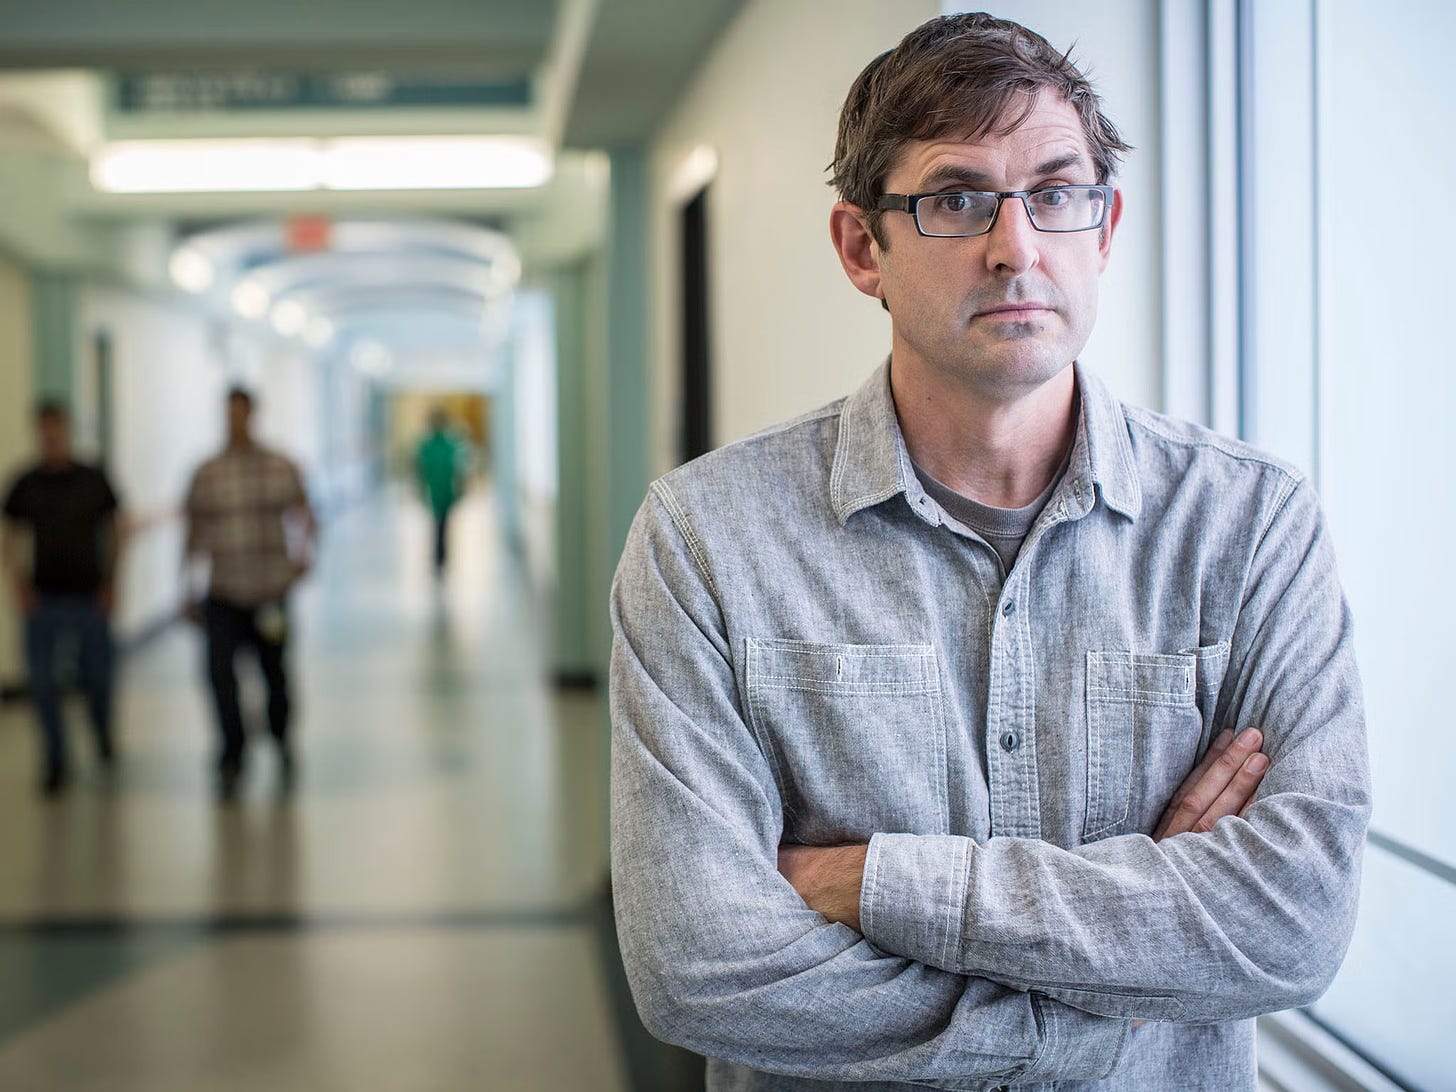 Photo of Louis Theroux in corridor with blurred people behind